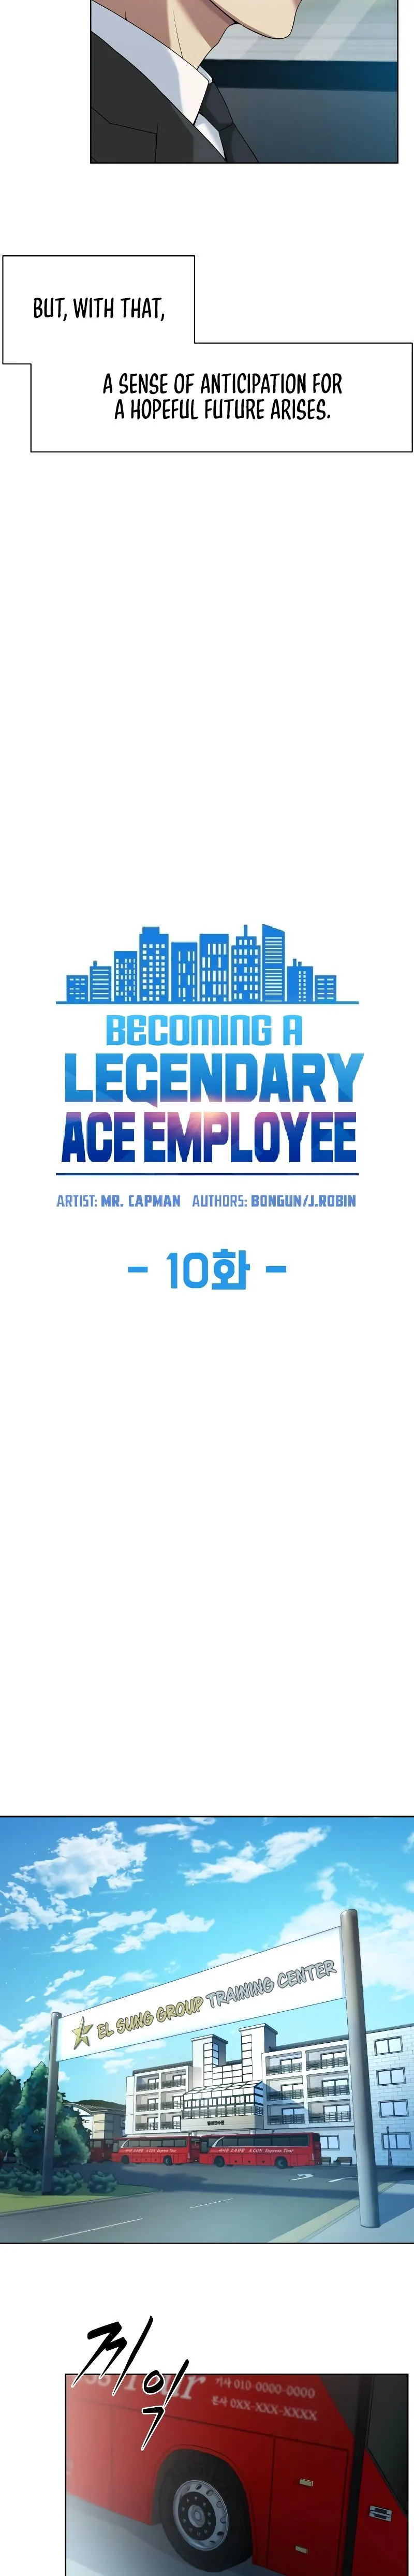 Becoming A Legendary Ace Employee - Page 3